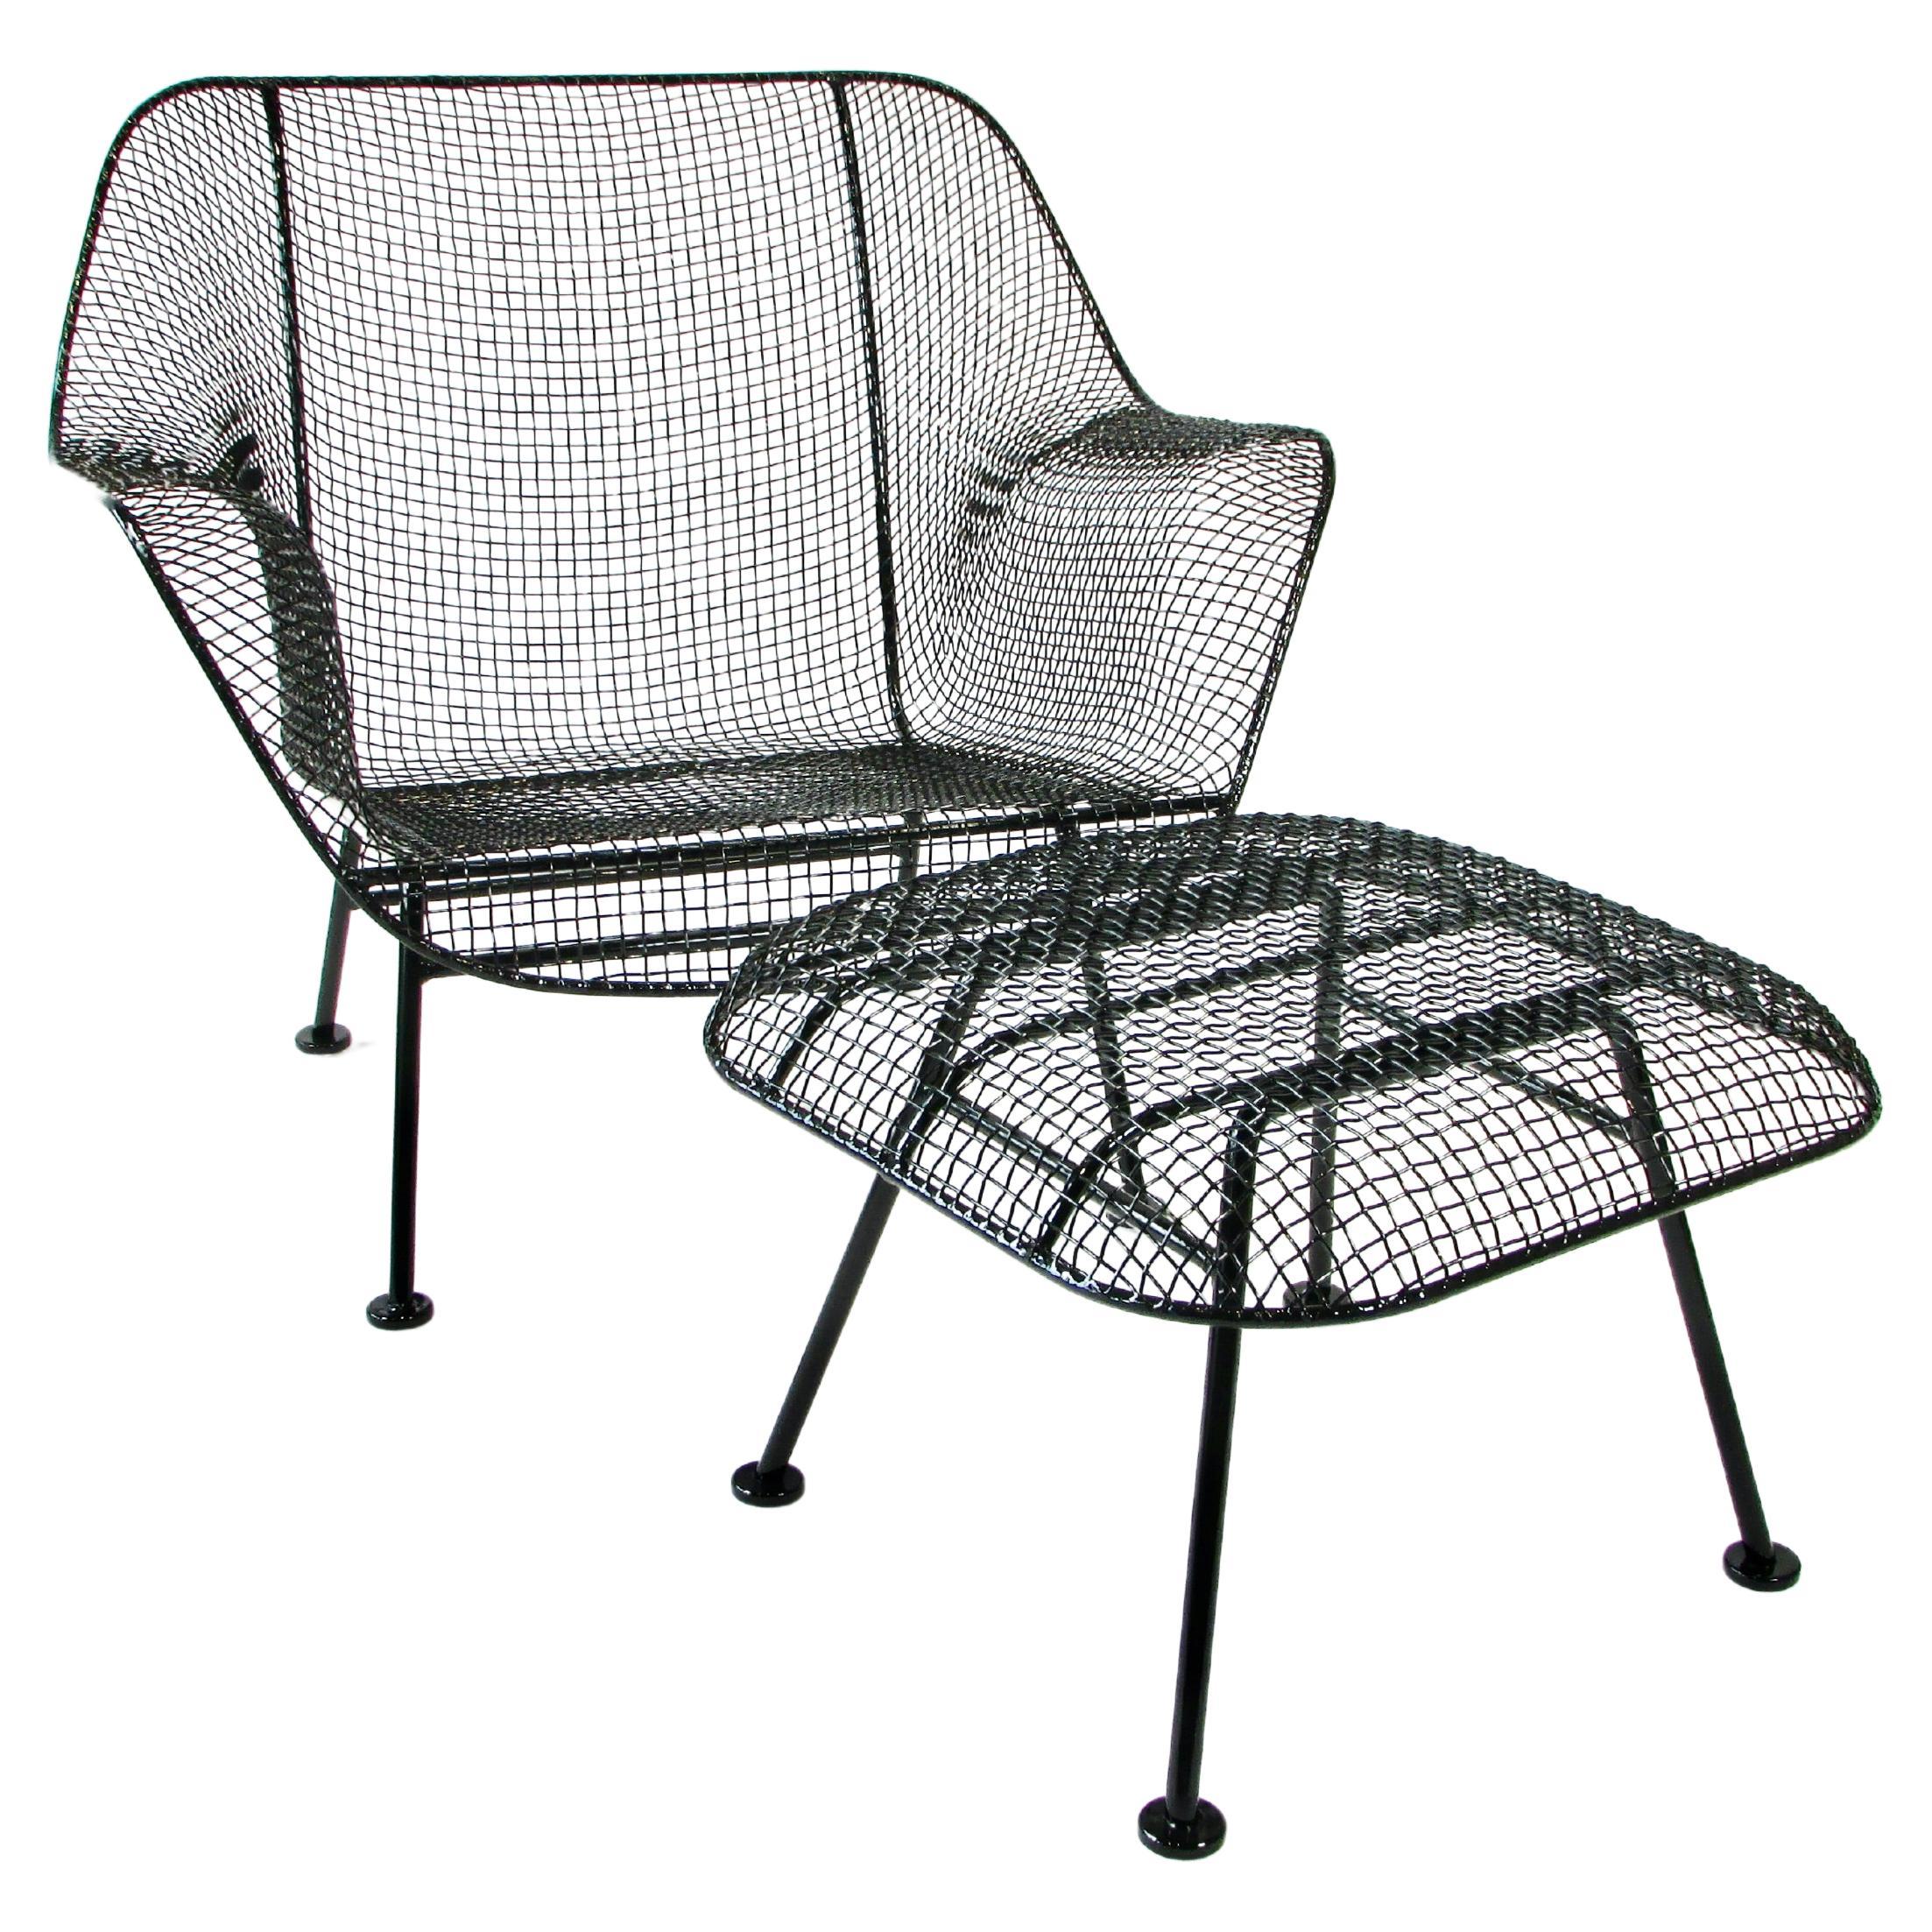 Large Woodard Sculptura Wrought Iron with Steel Mesh Lounge Chair and Ottoman